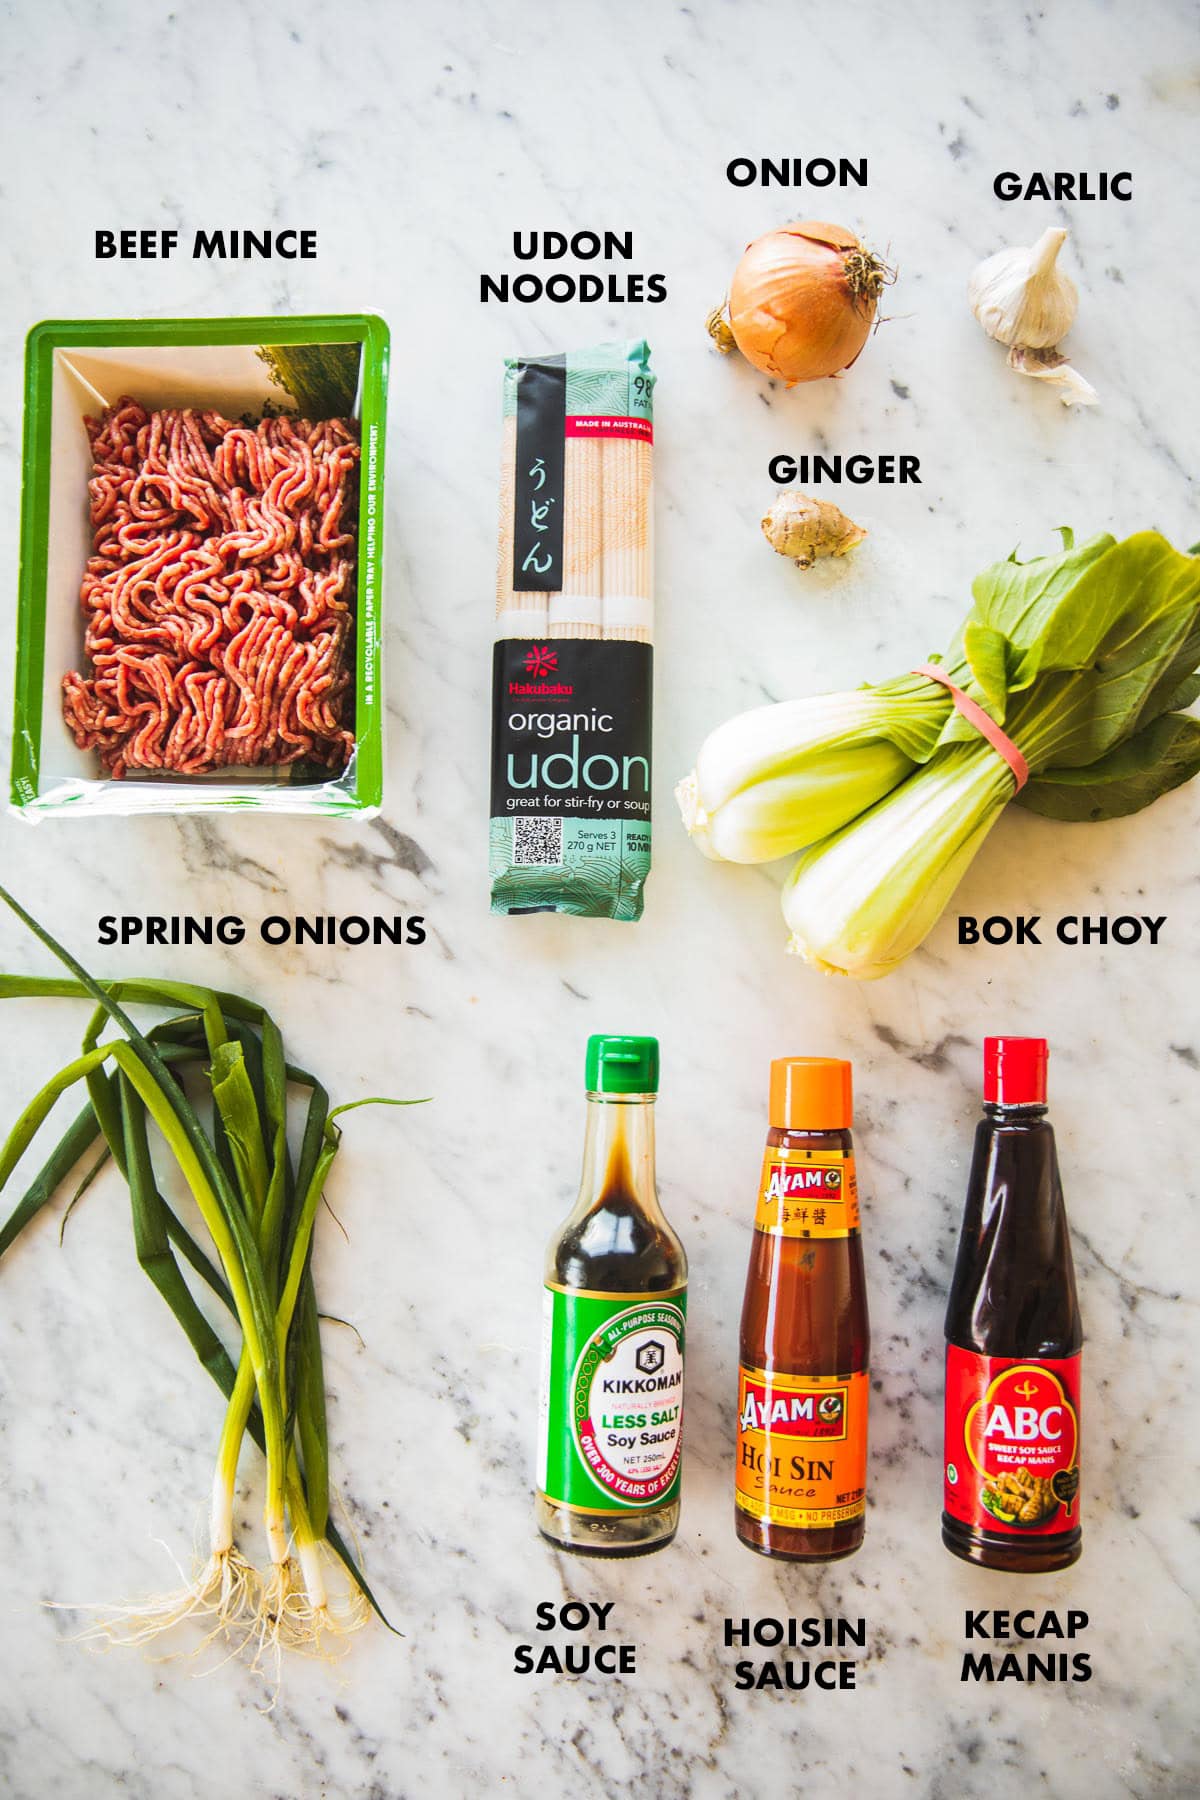 Hoisin Beef Noodles ingredients - Beef mince, udon noodles, onion, garlic, ginger, bok choy, spring onion, soy sauce, kecap manis and hoisin sauce.